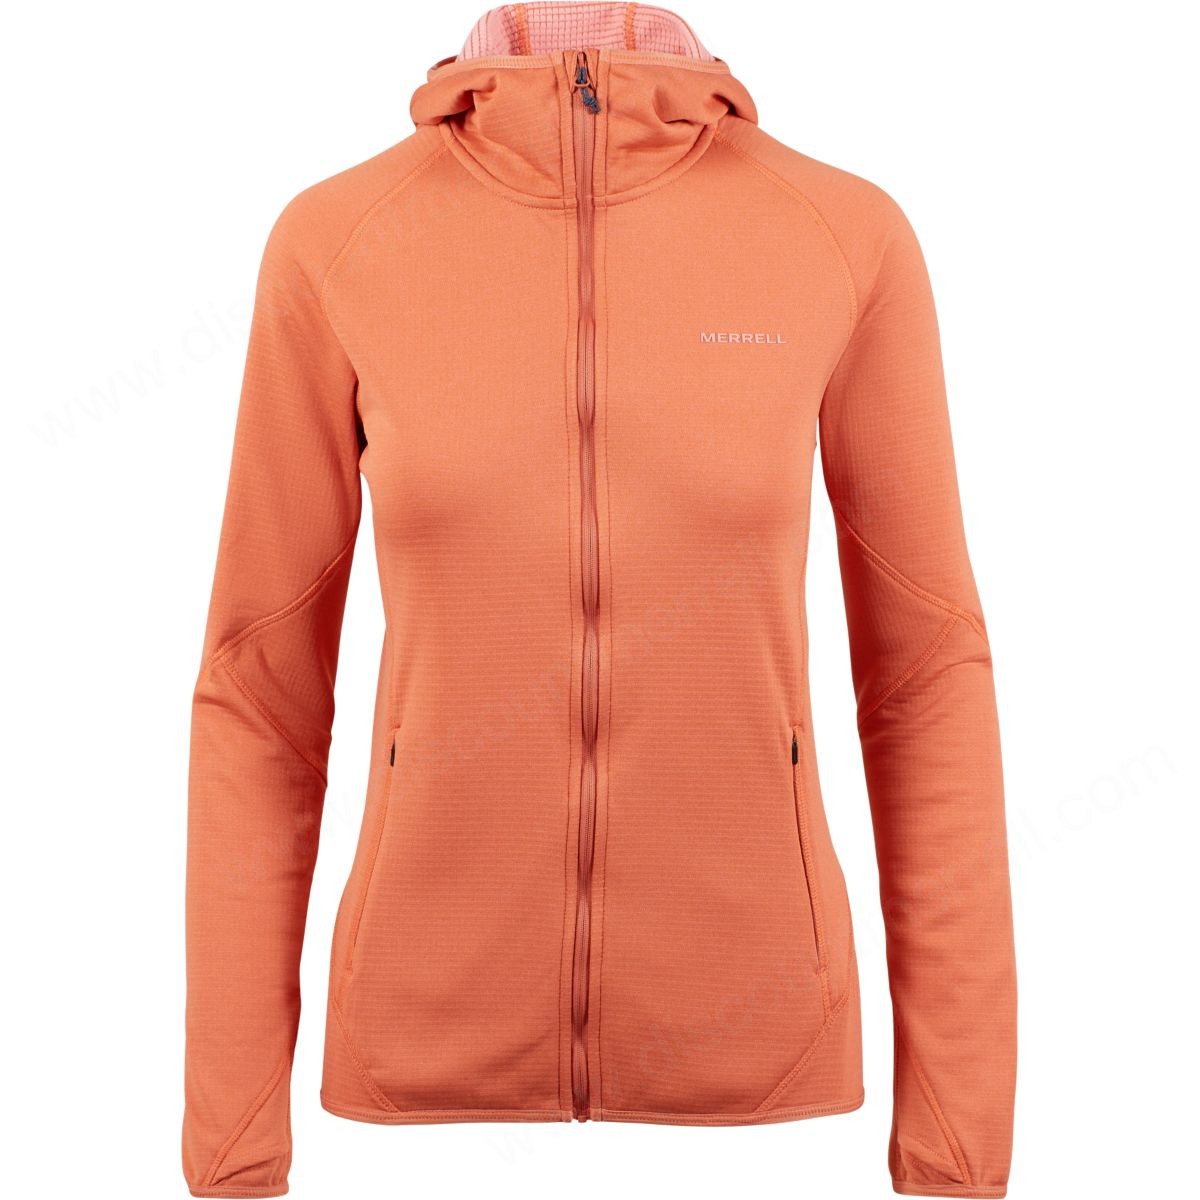 Merrell Woman's Midweight Long Sleeve Full Zip Mid-Layer With Drirelease® Fabric Apricot Brandy Heather - Merrell Woman's Midweight Long Sleeve Full Zip Mid-Layer With Drirelease® Fabric Apricot Brandy Heather